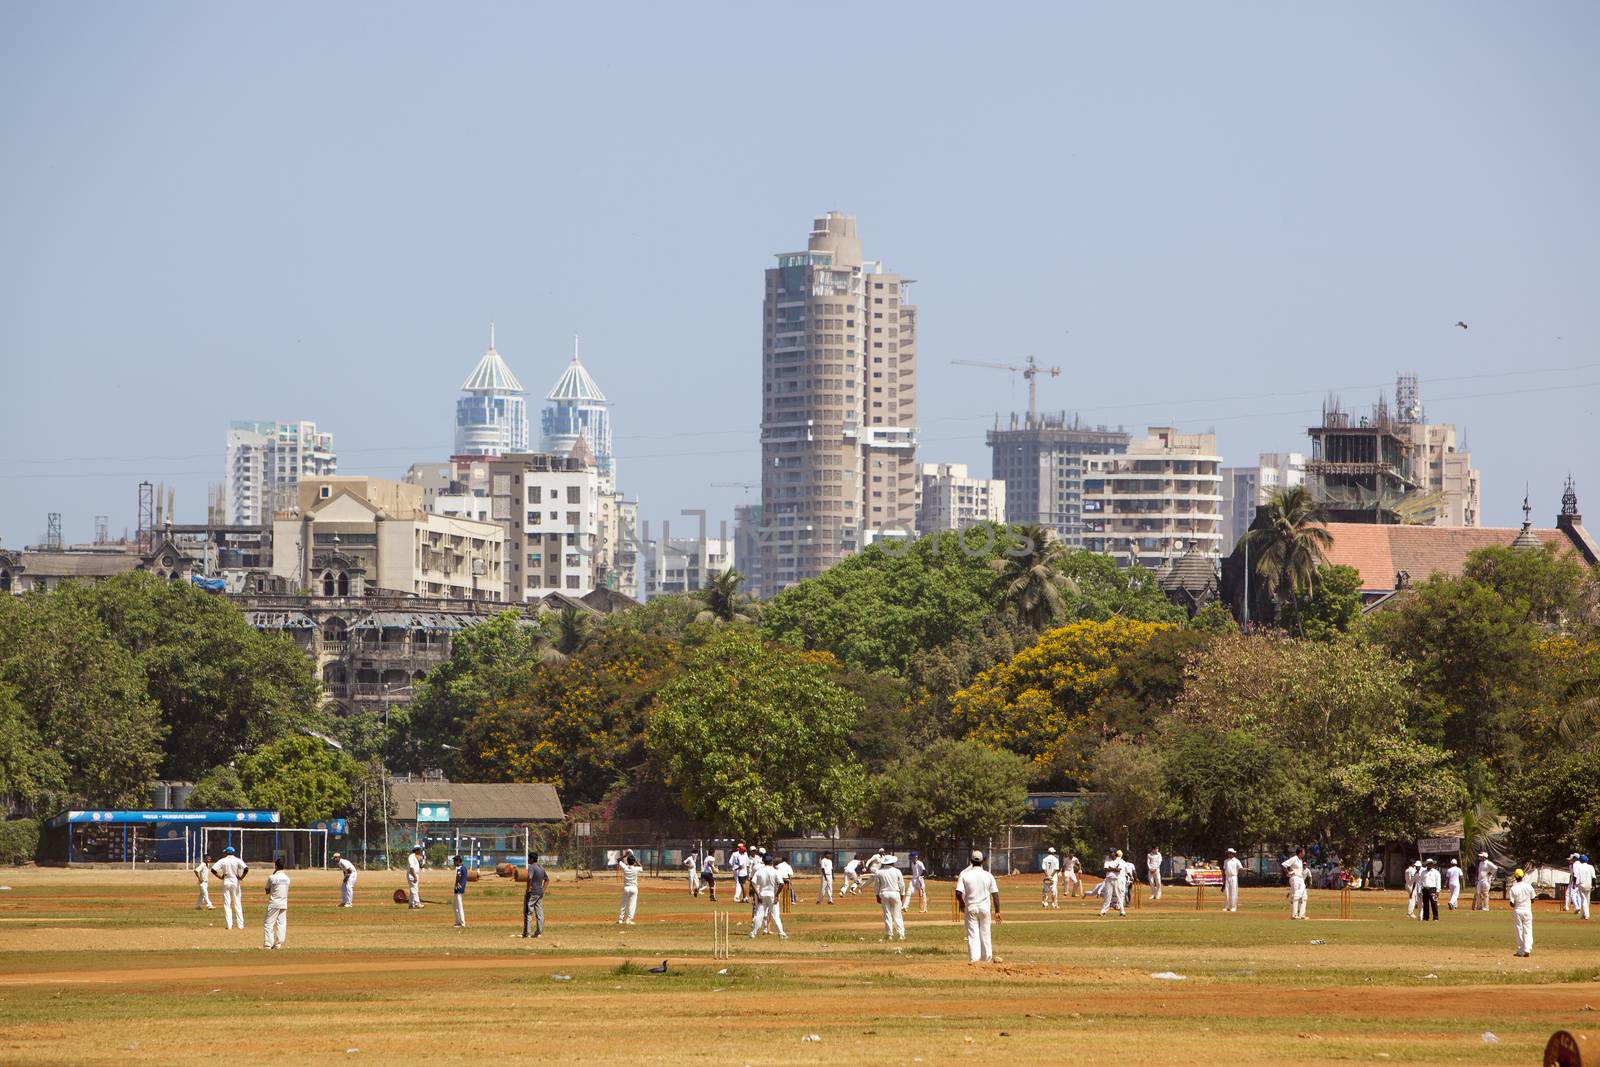 Mumbai, India - April 16, 2013: Indians playing cricked on a field in the centre of Mumbai.